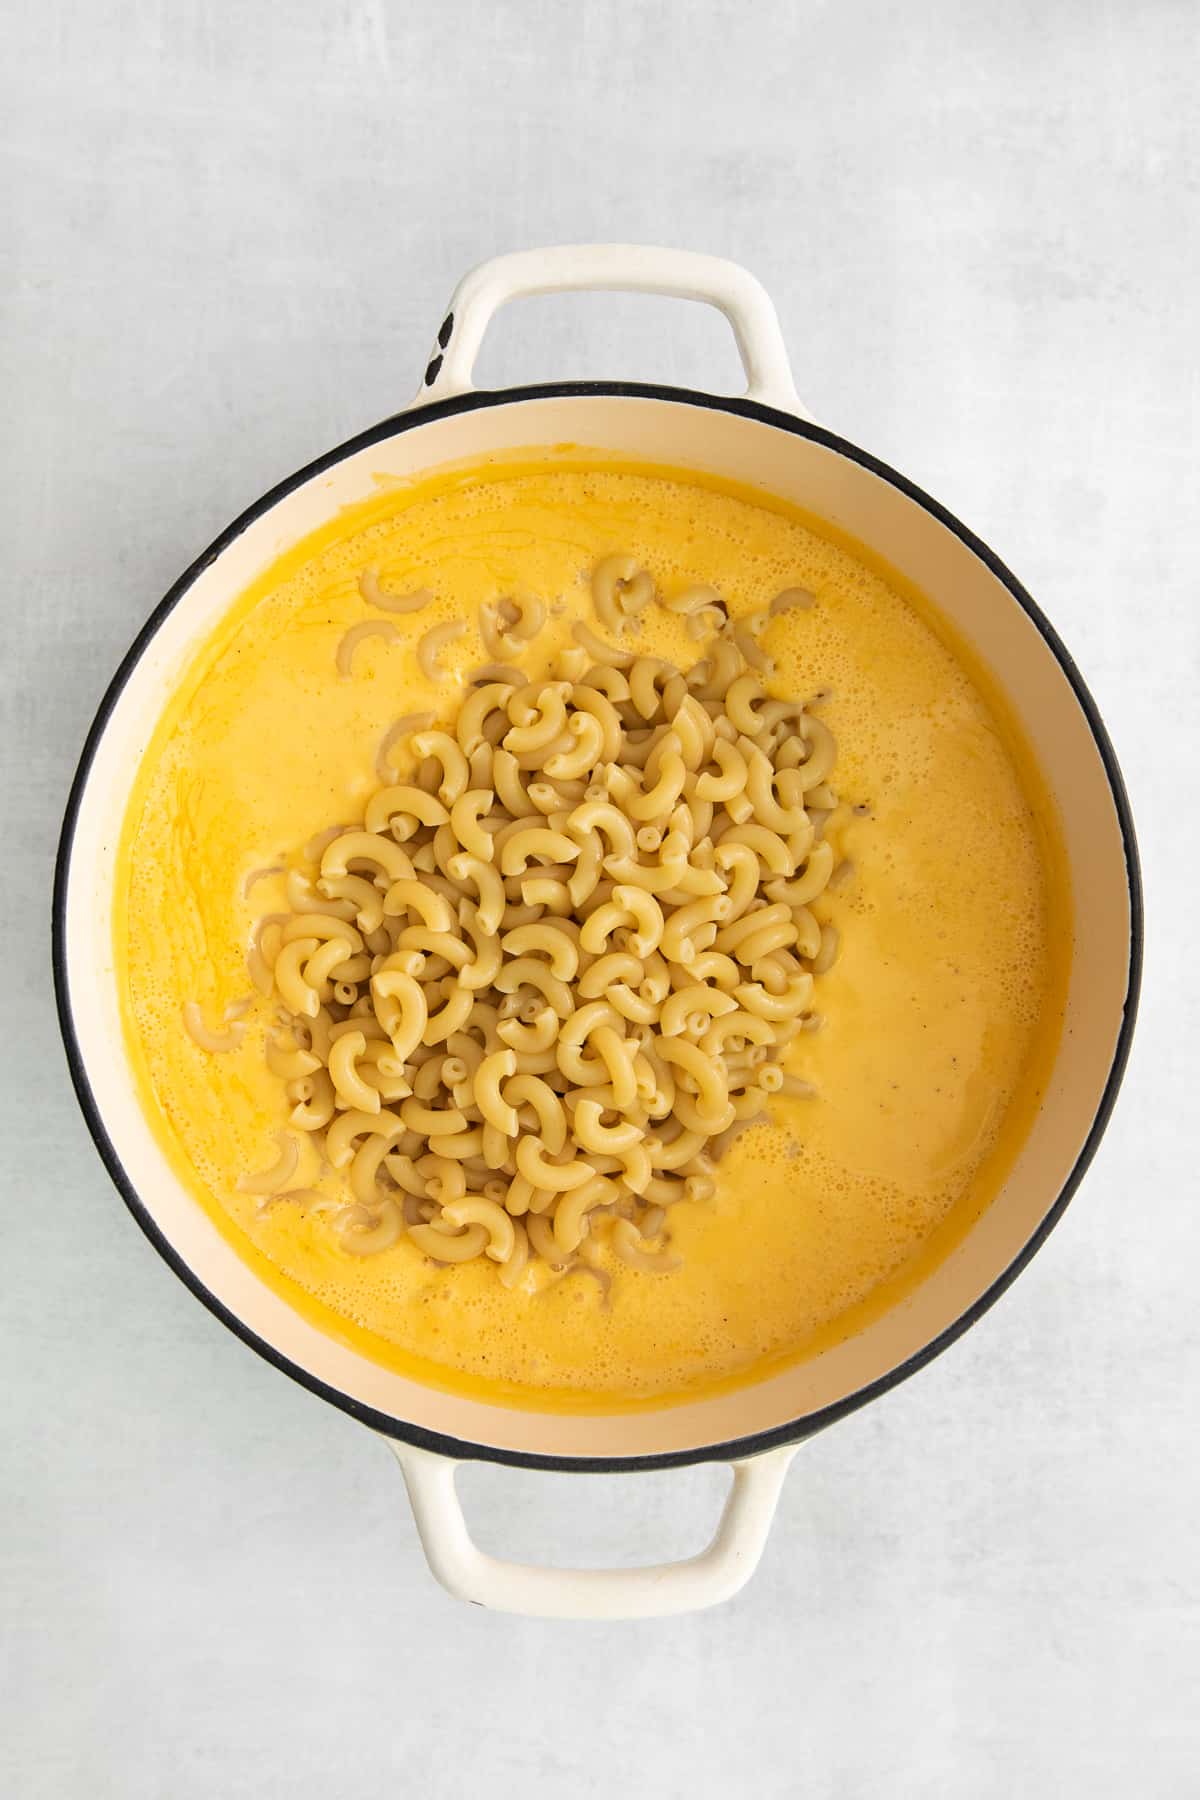 Macaroni noodles in a cheese soup.